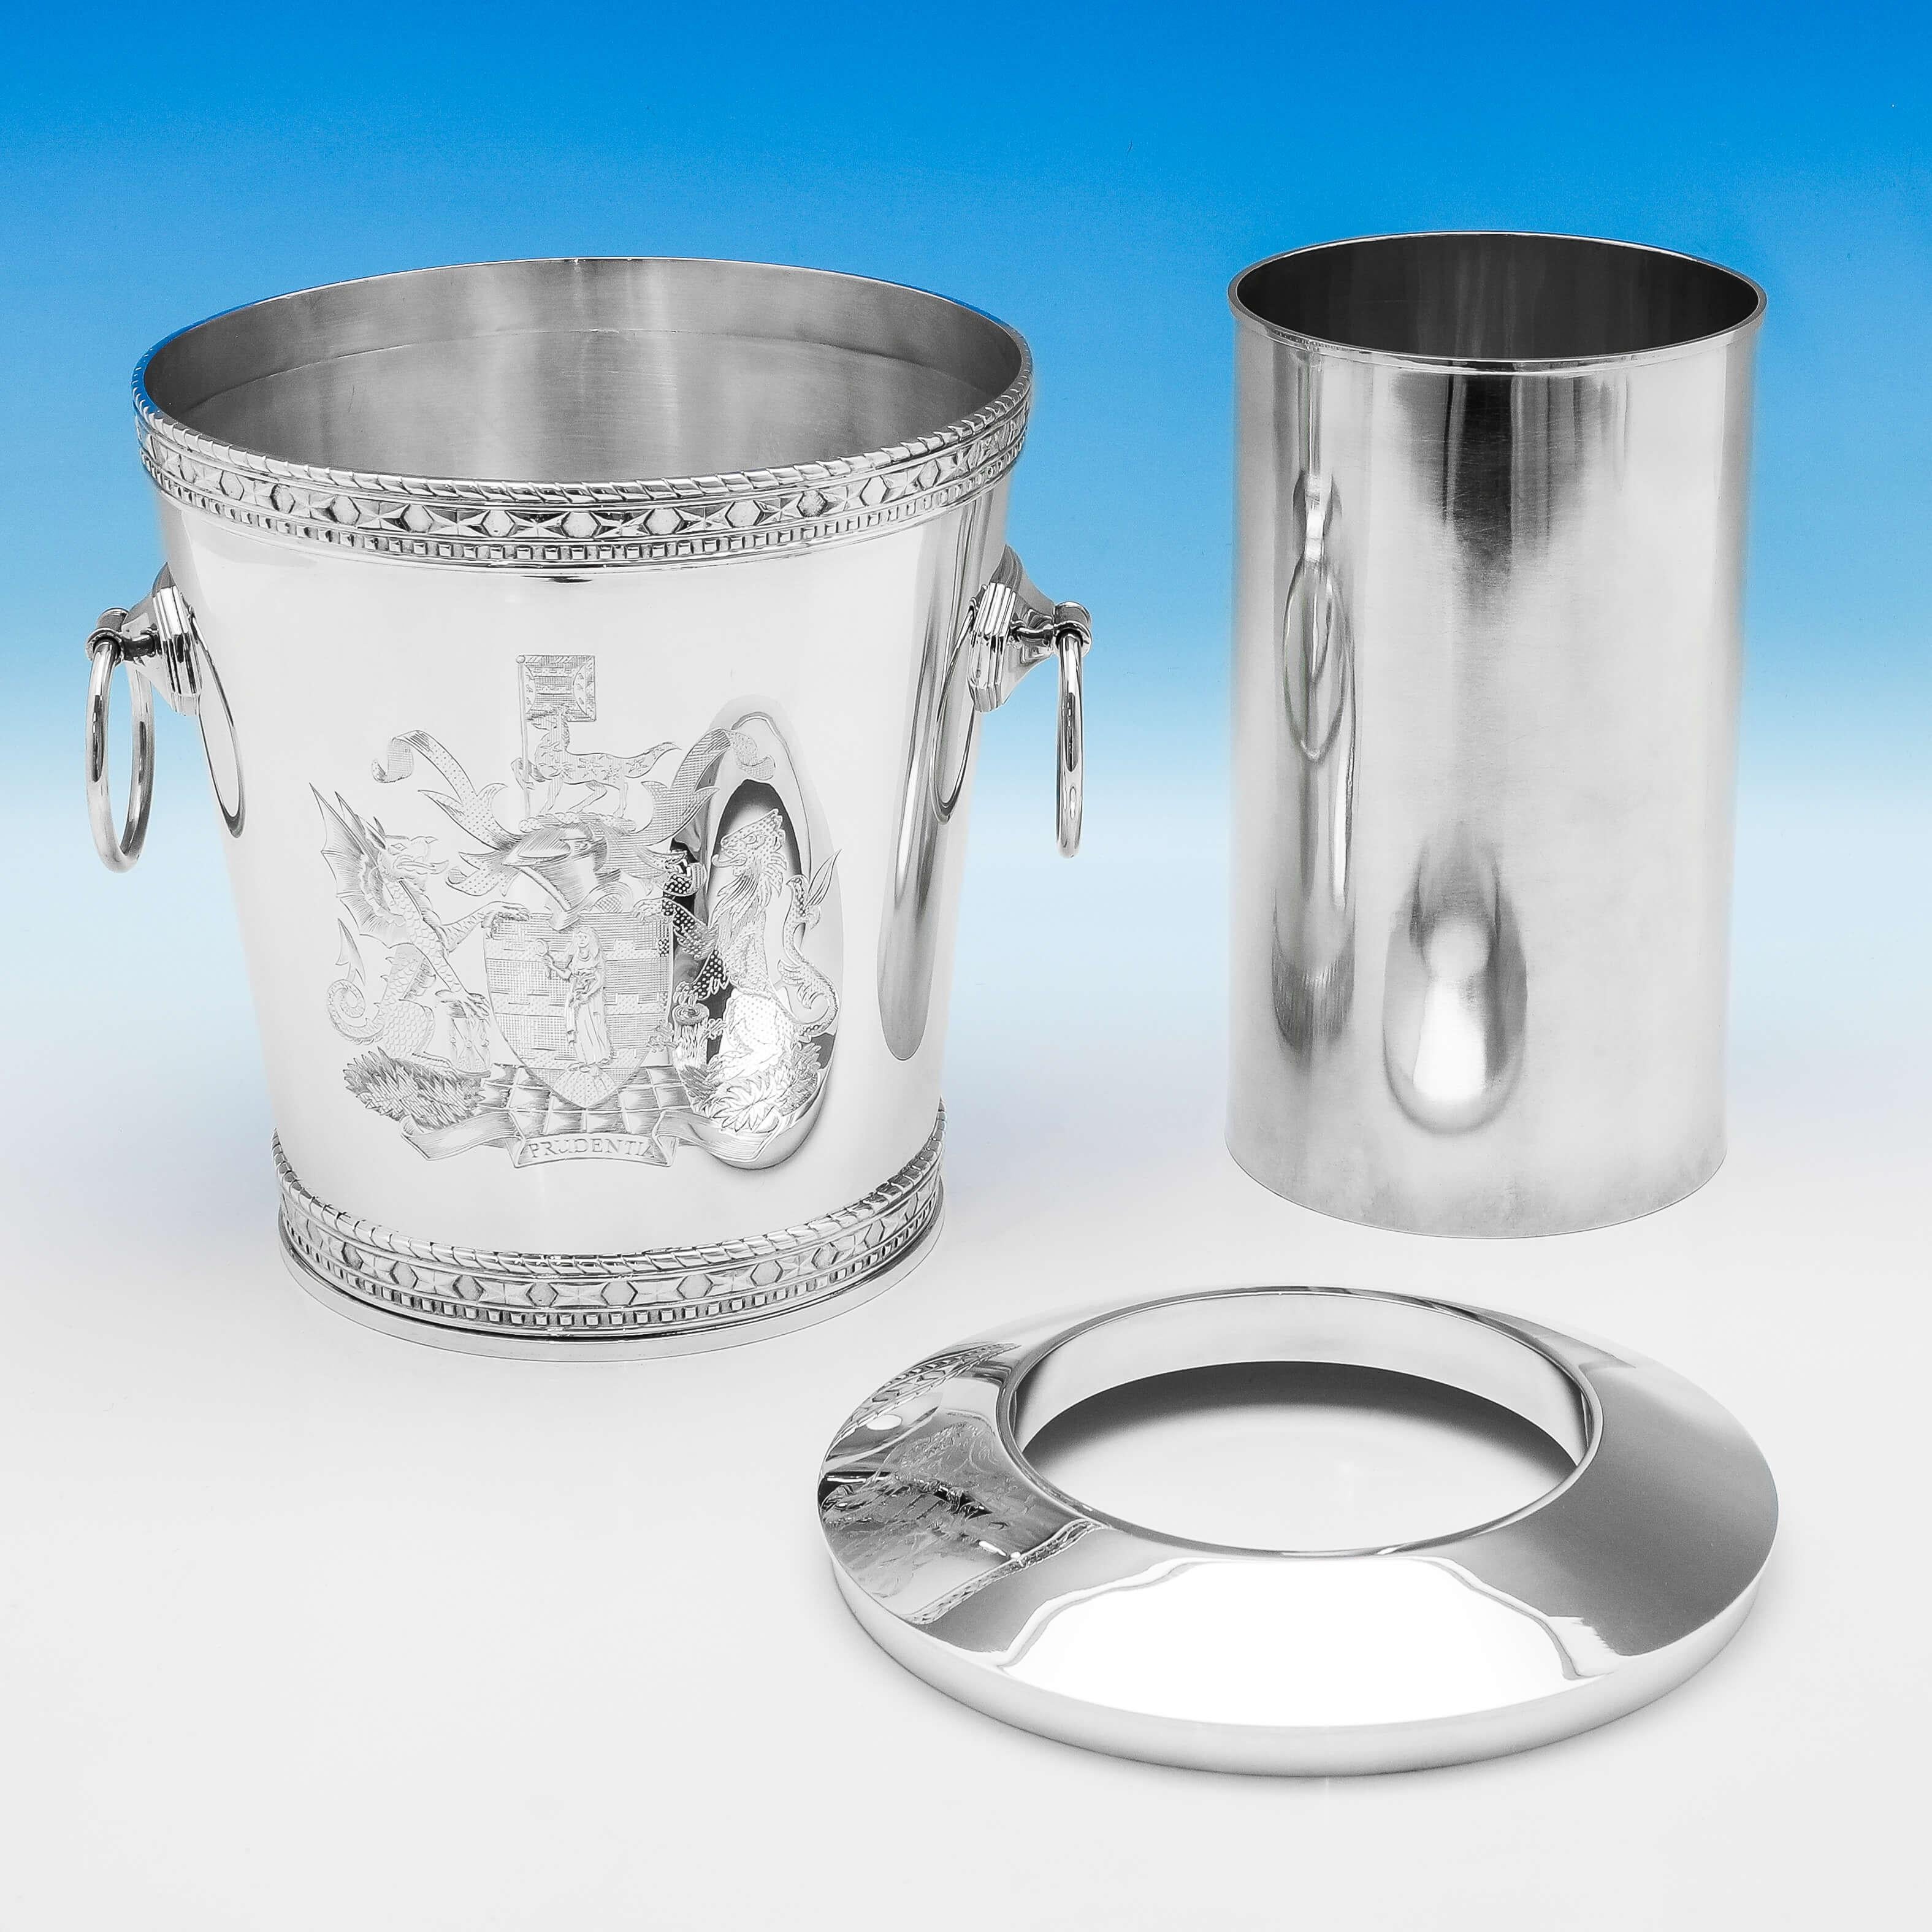 Hallmarked in London in 1995 by I. Franks, this spectacular pair of Elizabeth II, Sterling Silver Wine Coolers, are hand engraved with the Coat of Arms for Prudential Insurance Company, who commissioned these directly from us. Each wine cooler